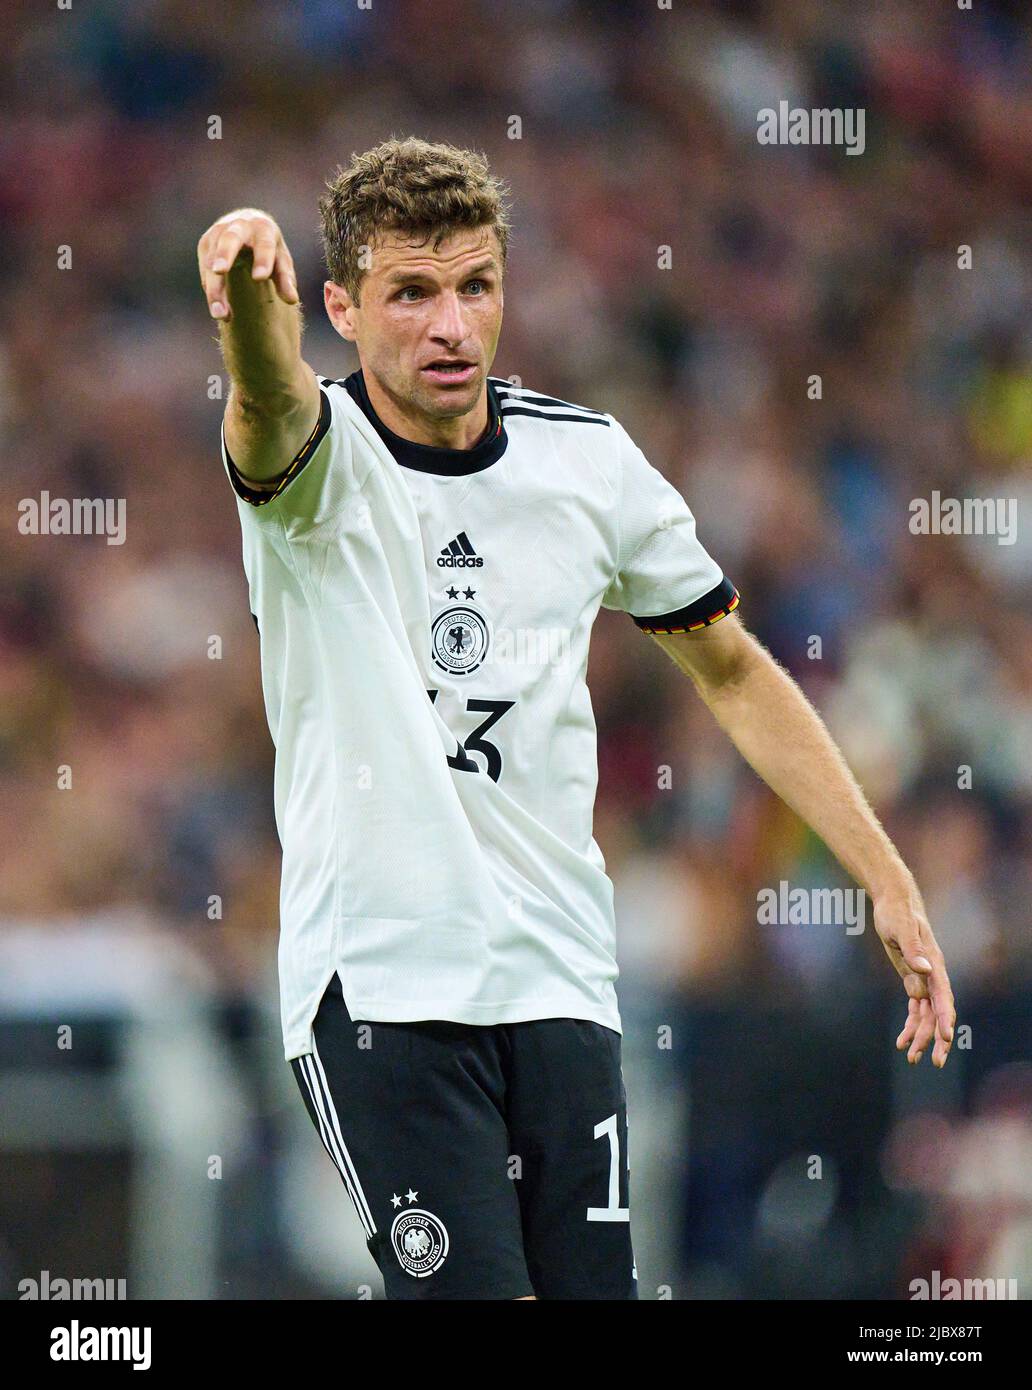 Thomas Müller, DFB 13 in the UEFA Nations League 2022 match GERMANY -  ENGLAND 1-1 in Season 2022/2023 on Juni 07, 2022 in Munich, Germany. ©  Peter Schatz / Alamy Live News Stock Photo - Alamy